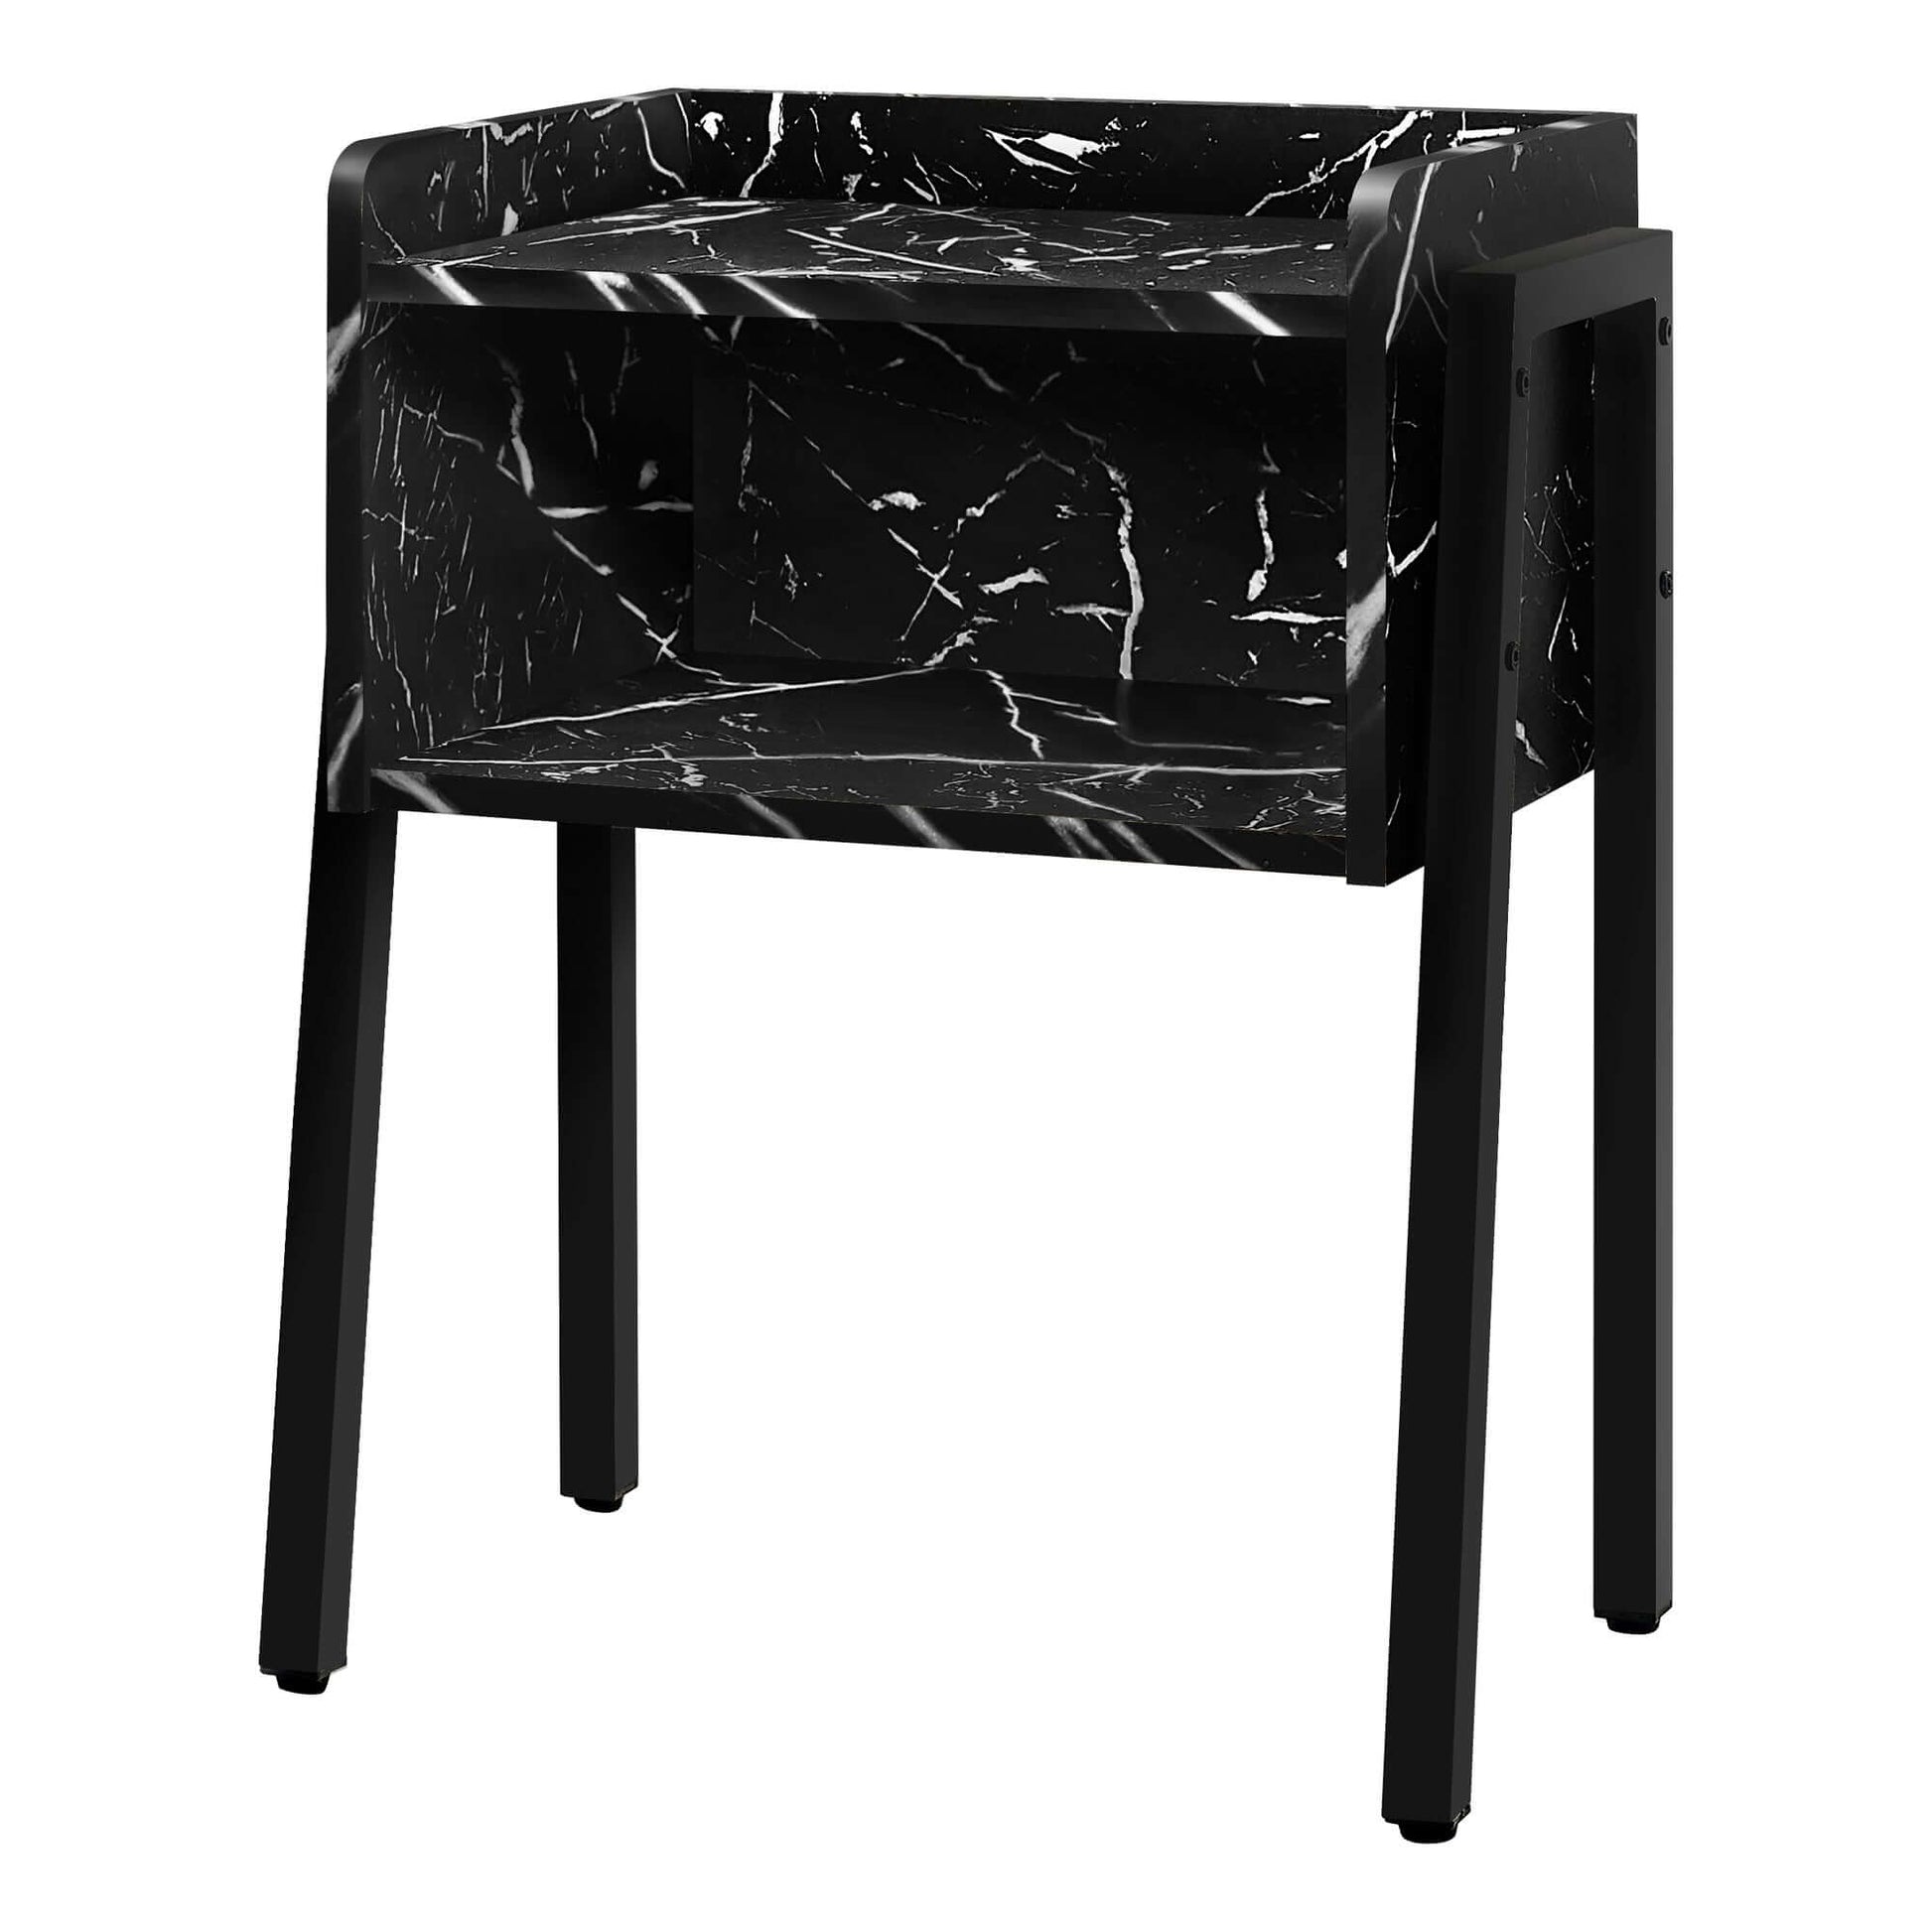 Monarch Specialties - Modern Nightstand in Black Marble Finish with Black Metal Frame - I 3590